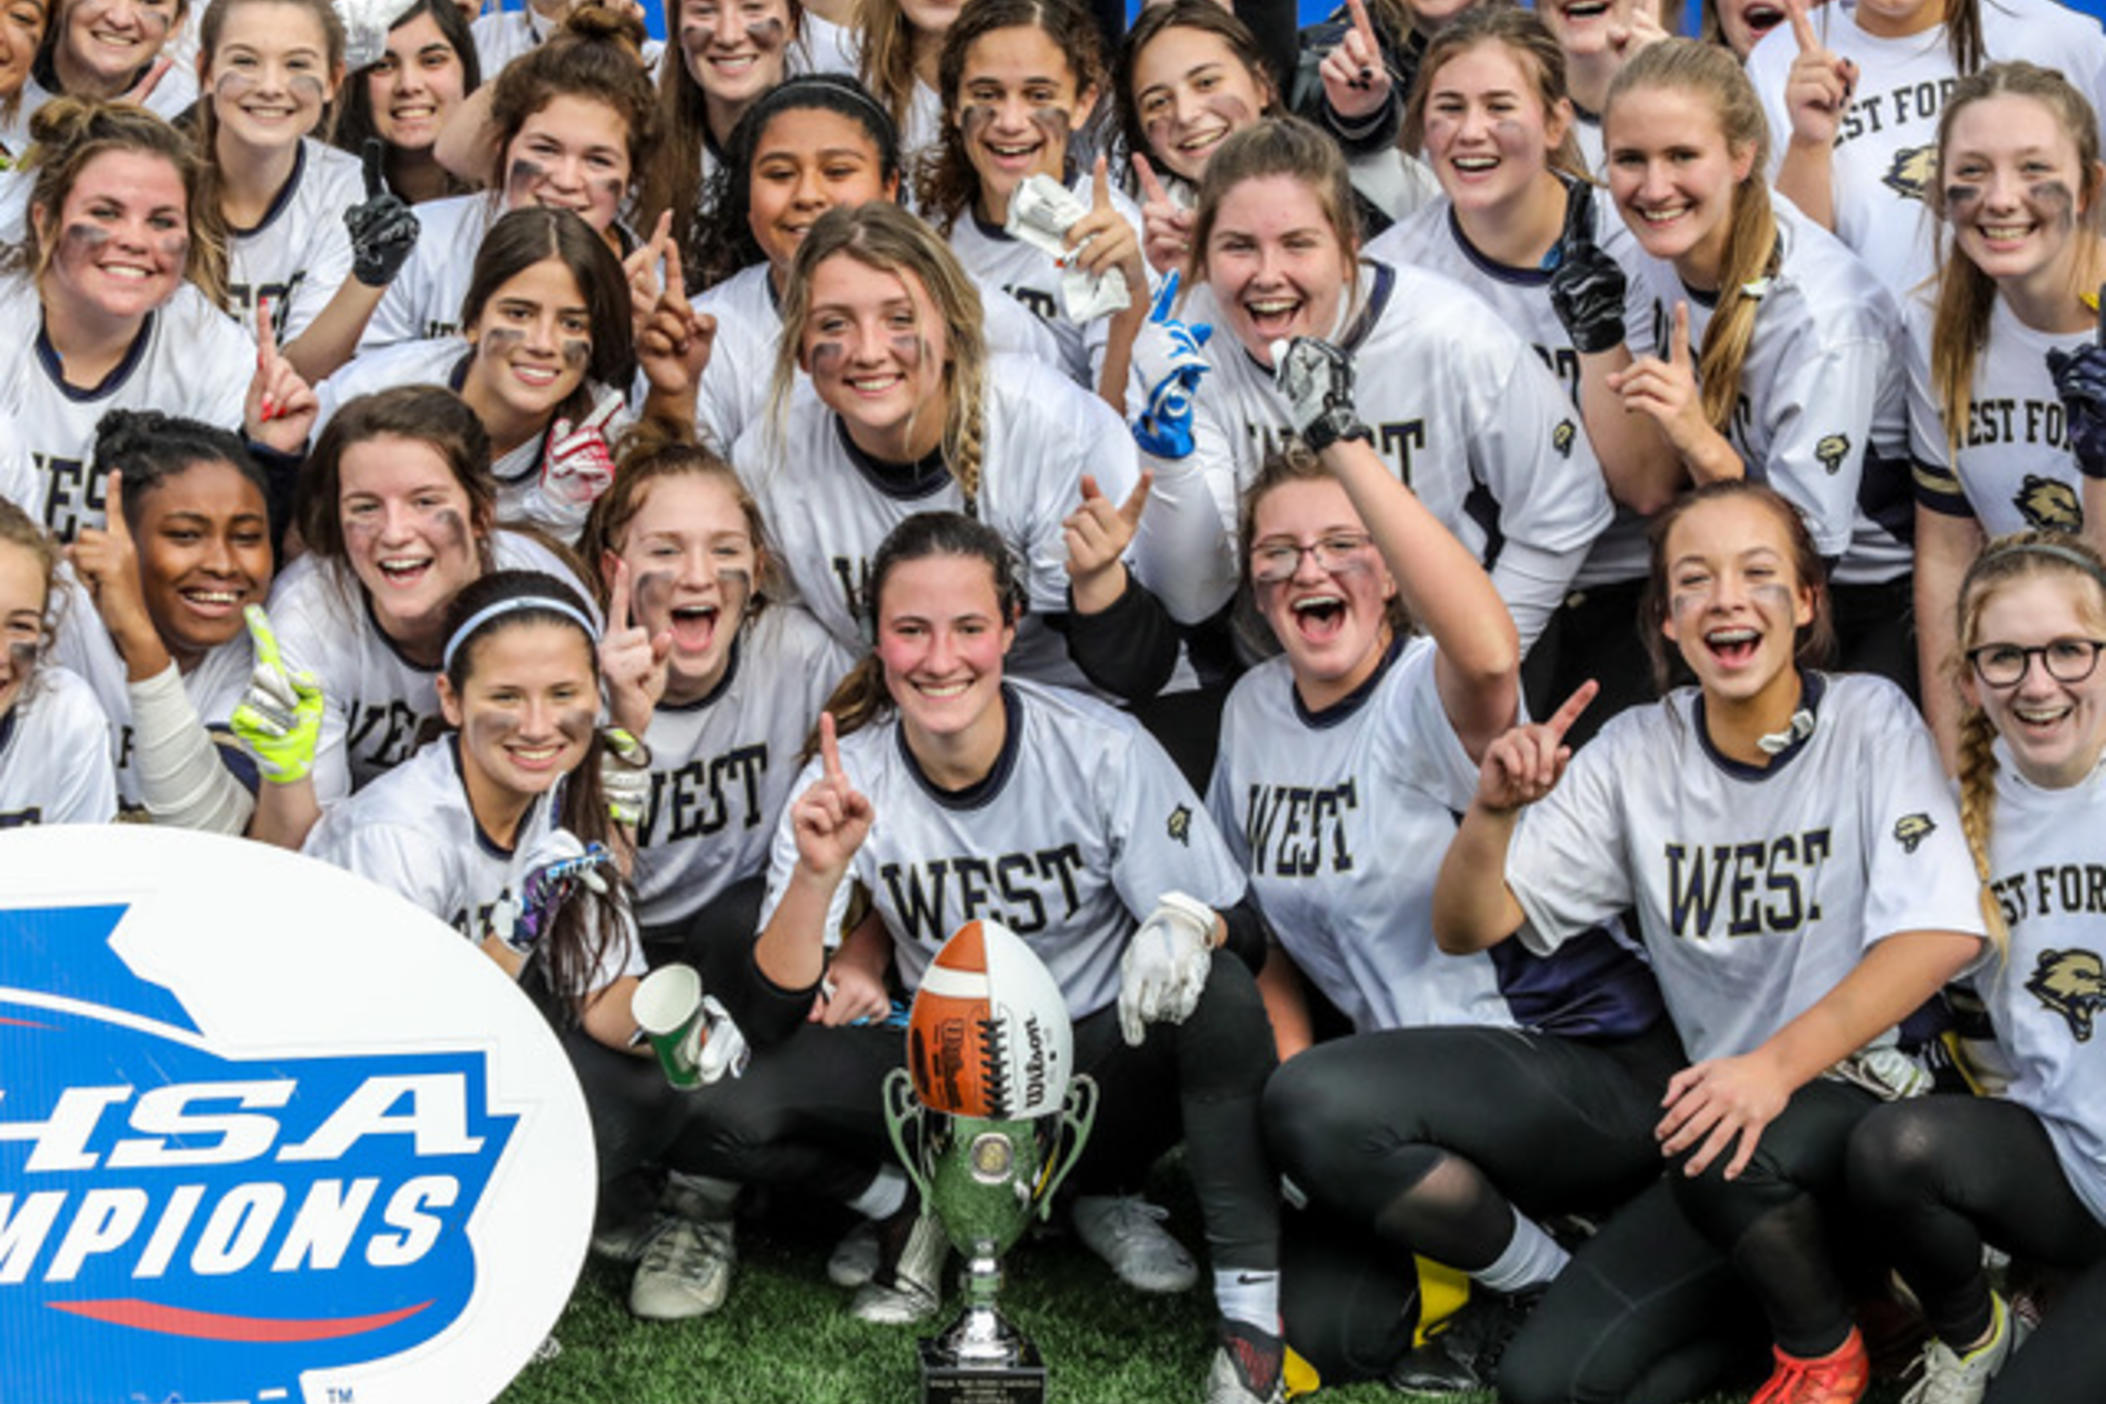 The West Forsyth Wolverines won the 2020 Girls Flag Football State Championship.